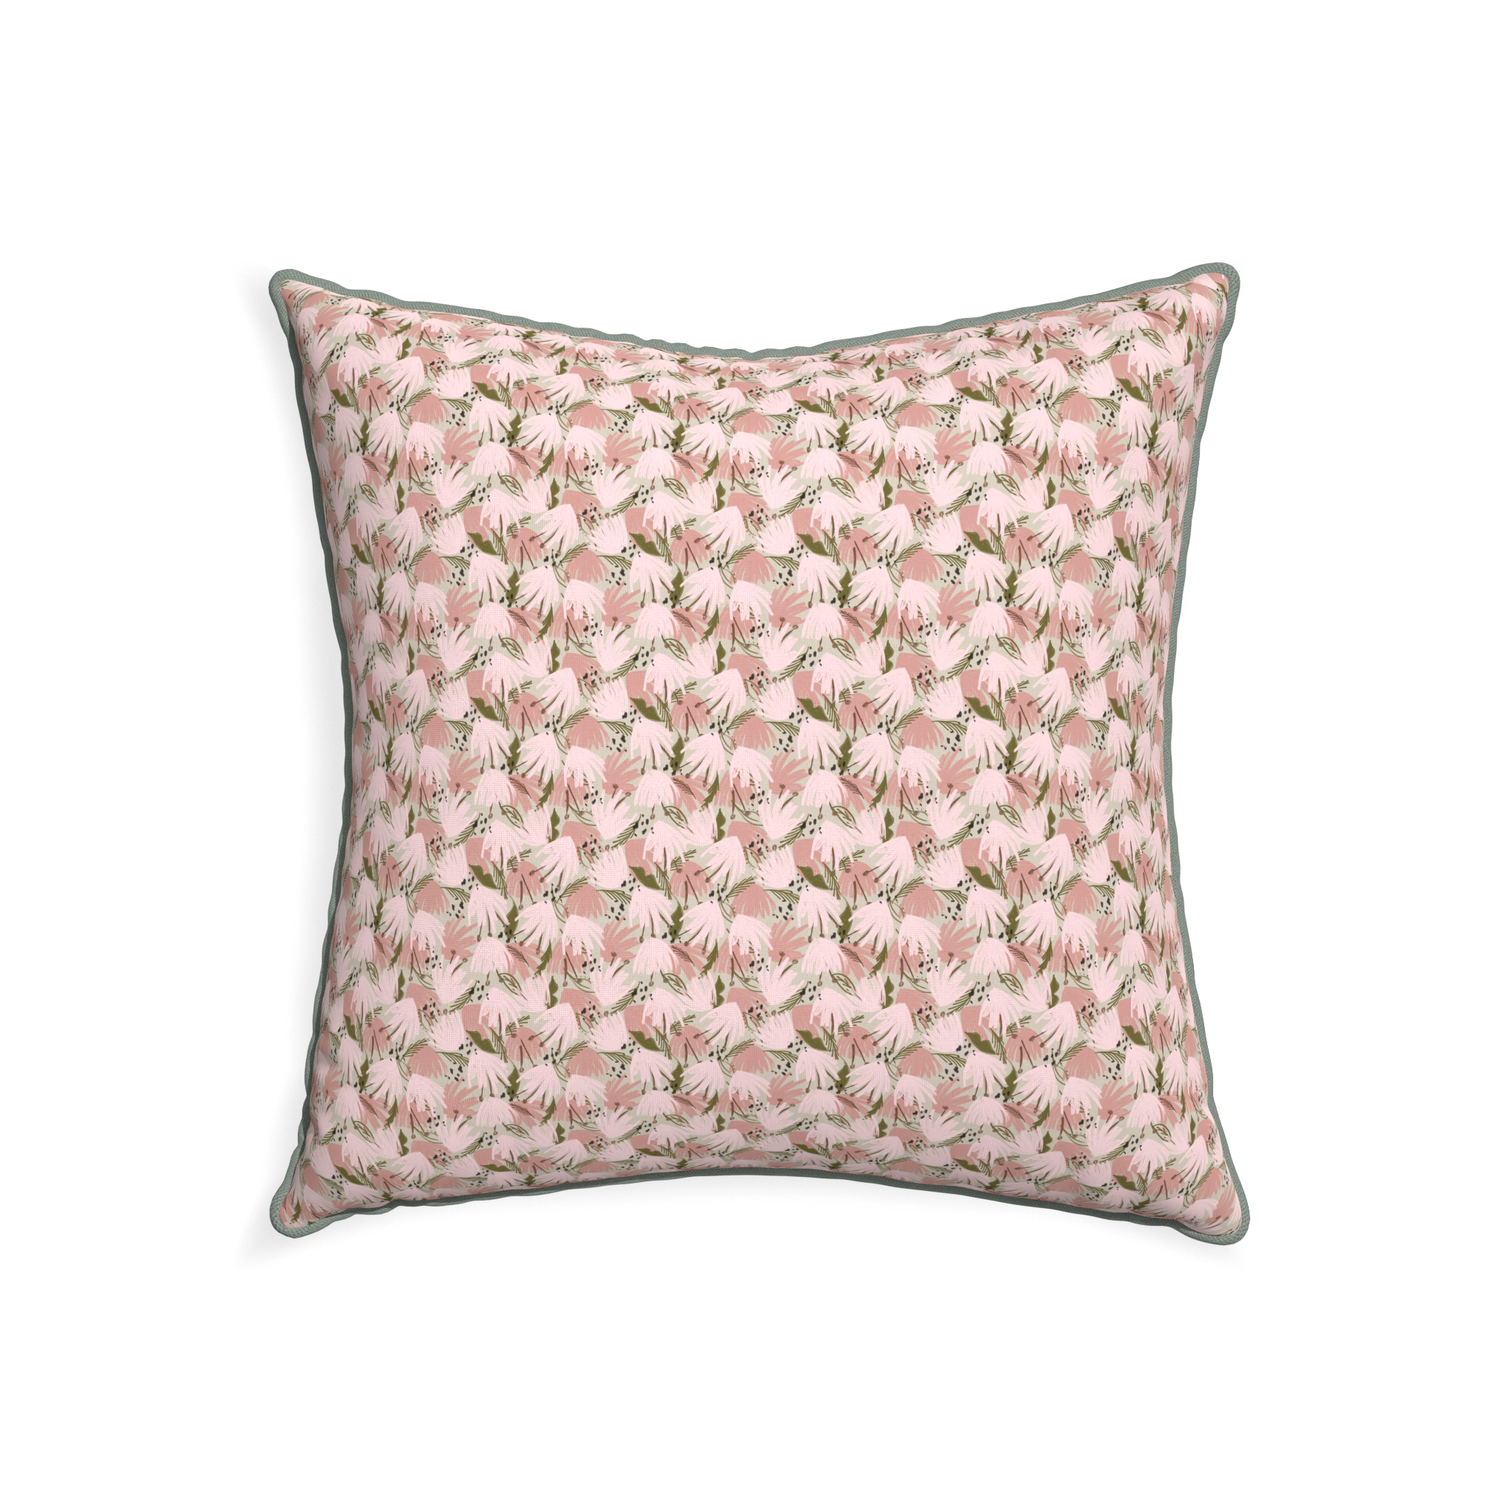 22-square eden pink custom pink floralpillow with sage piping on white background